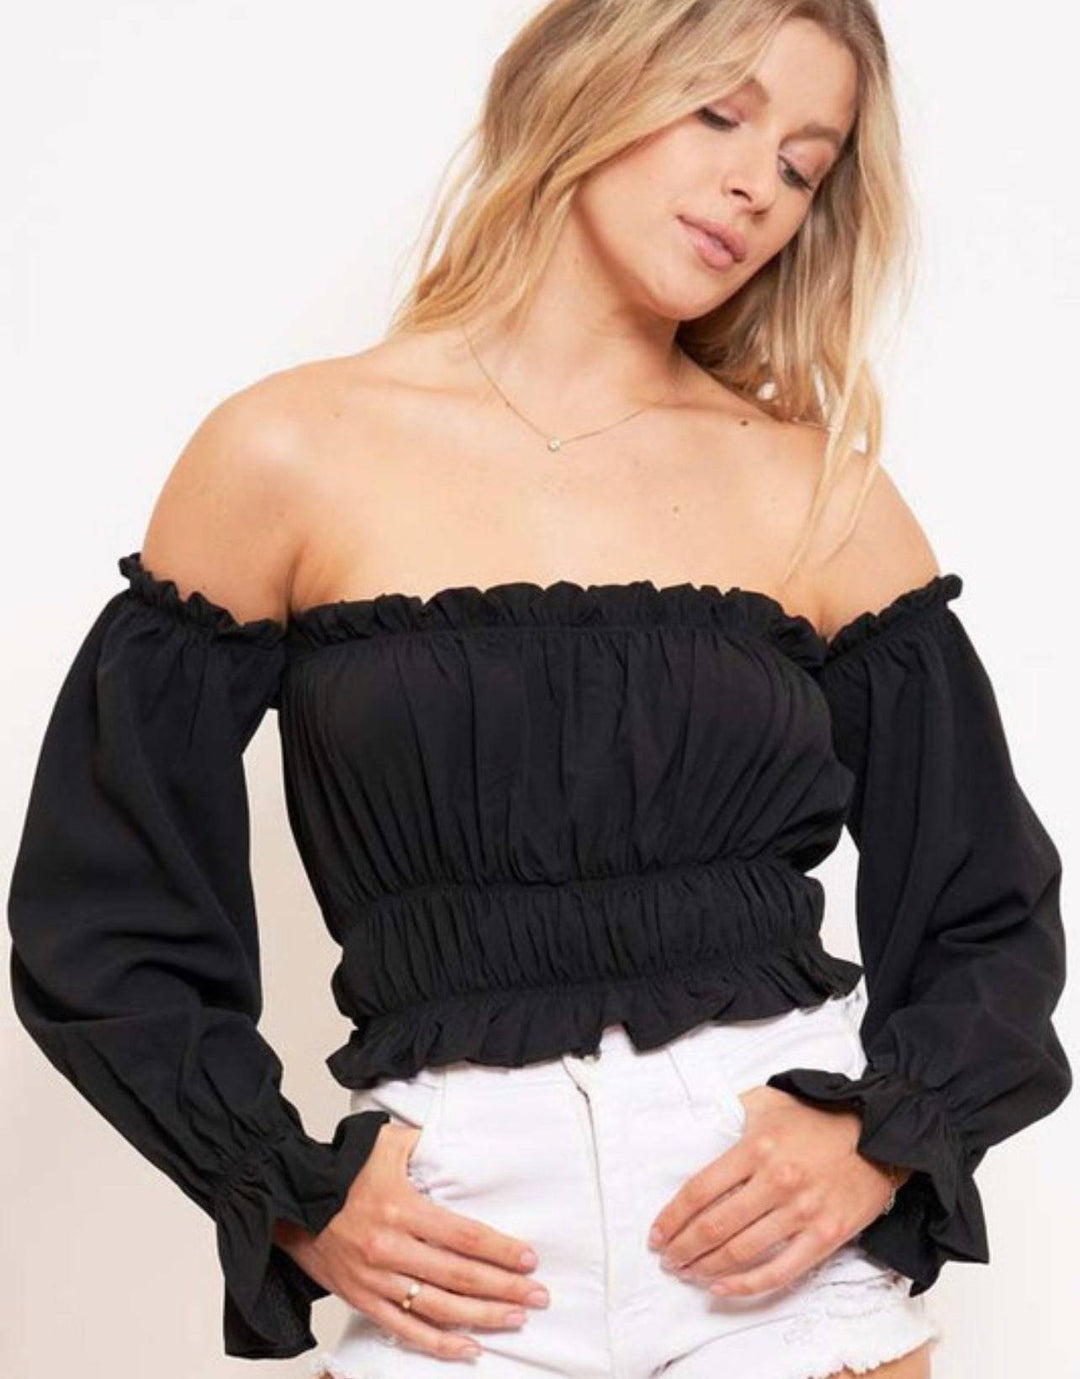 Celine Off Shoulder Top - Style Baby OMG Fashion Boutique - Stylebabyomg - Buy - Aesthetic Baddie Outfits - Babyboo - OOTD - Shie 